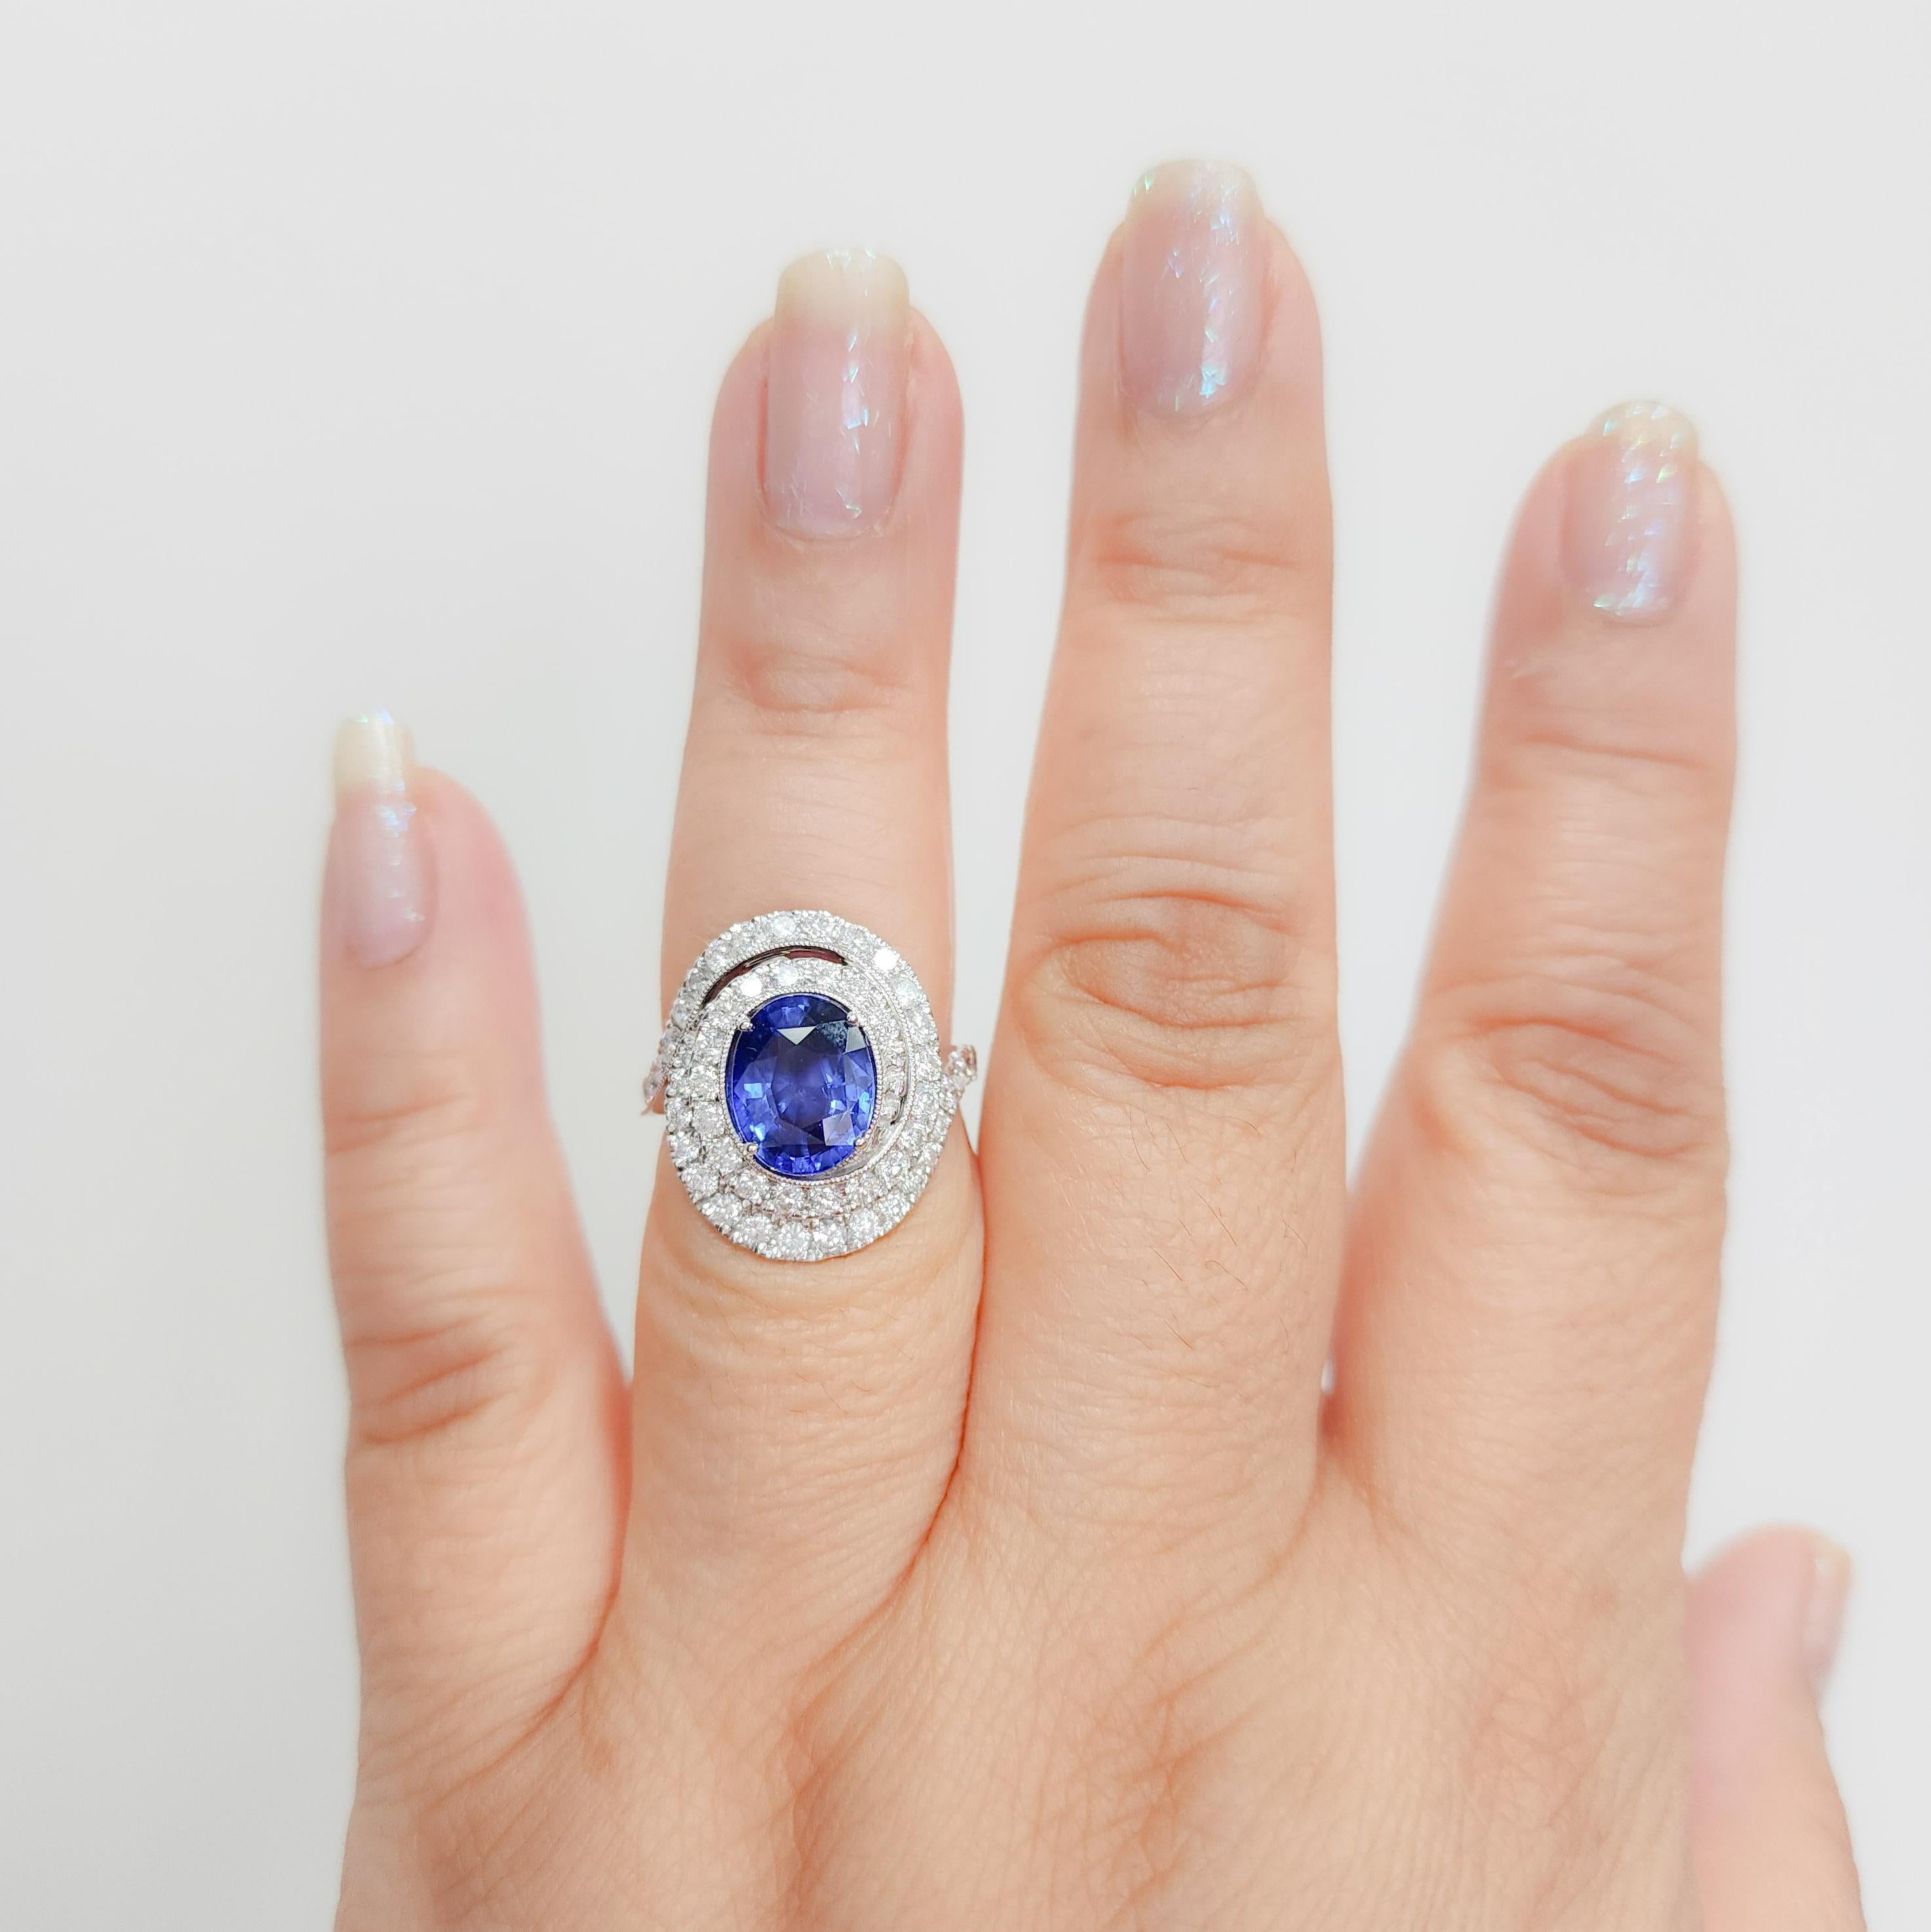 Beautiful 3.28 ct. blue sapphire oval with 1.52 ct. good quality white diamond rounds.  Handmade in 14k white gold.  Ring size 6.5.  GIA certificate included.